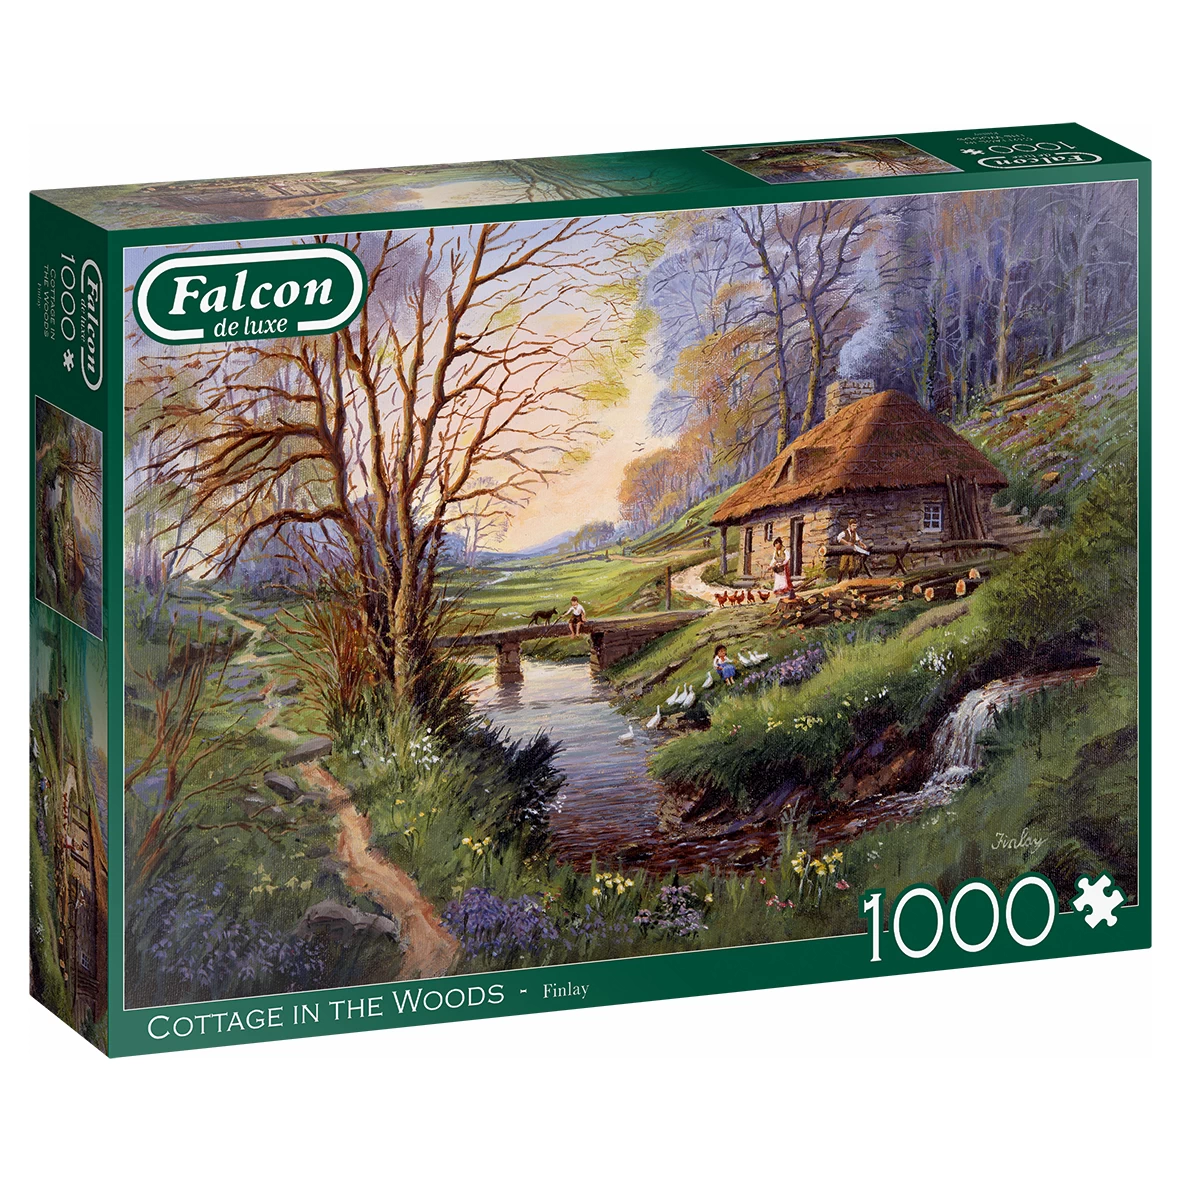 Puzzle - Cottage in the Woods (Falcon de Luxe) - 1000 Teile